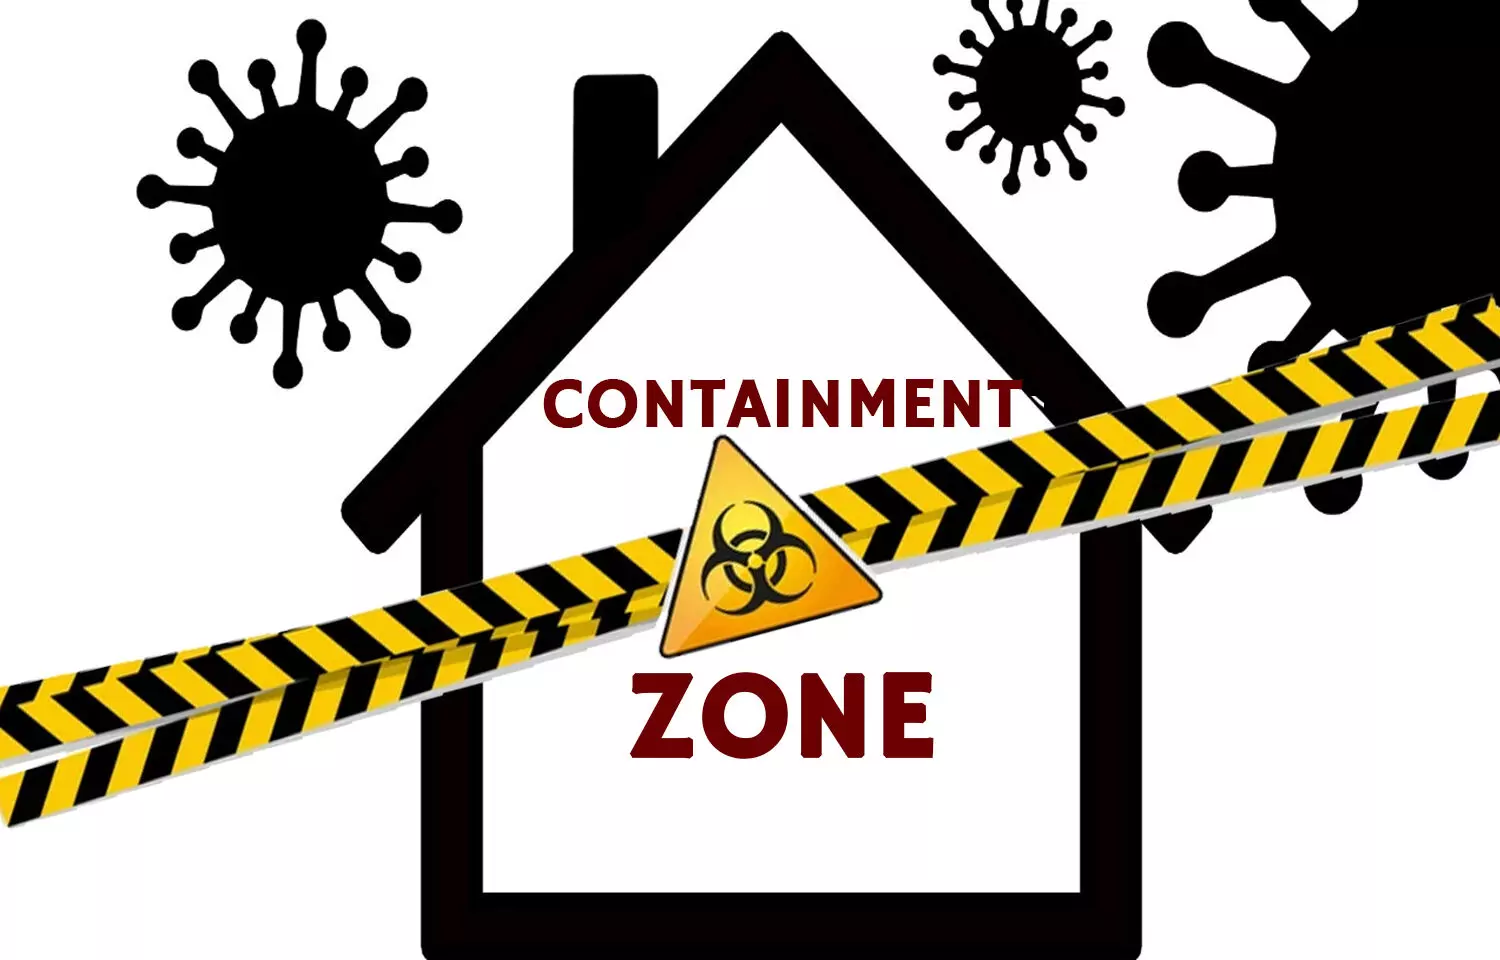 MIT Campus declared as Containment Zone after 59 test Covid-19 positive